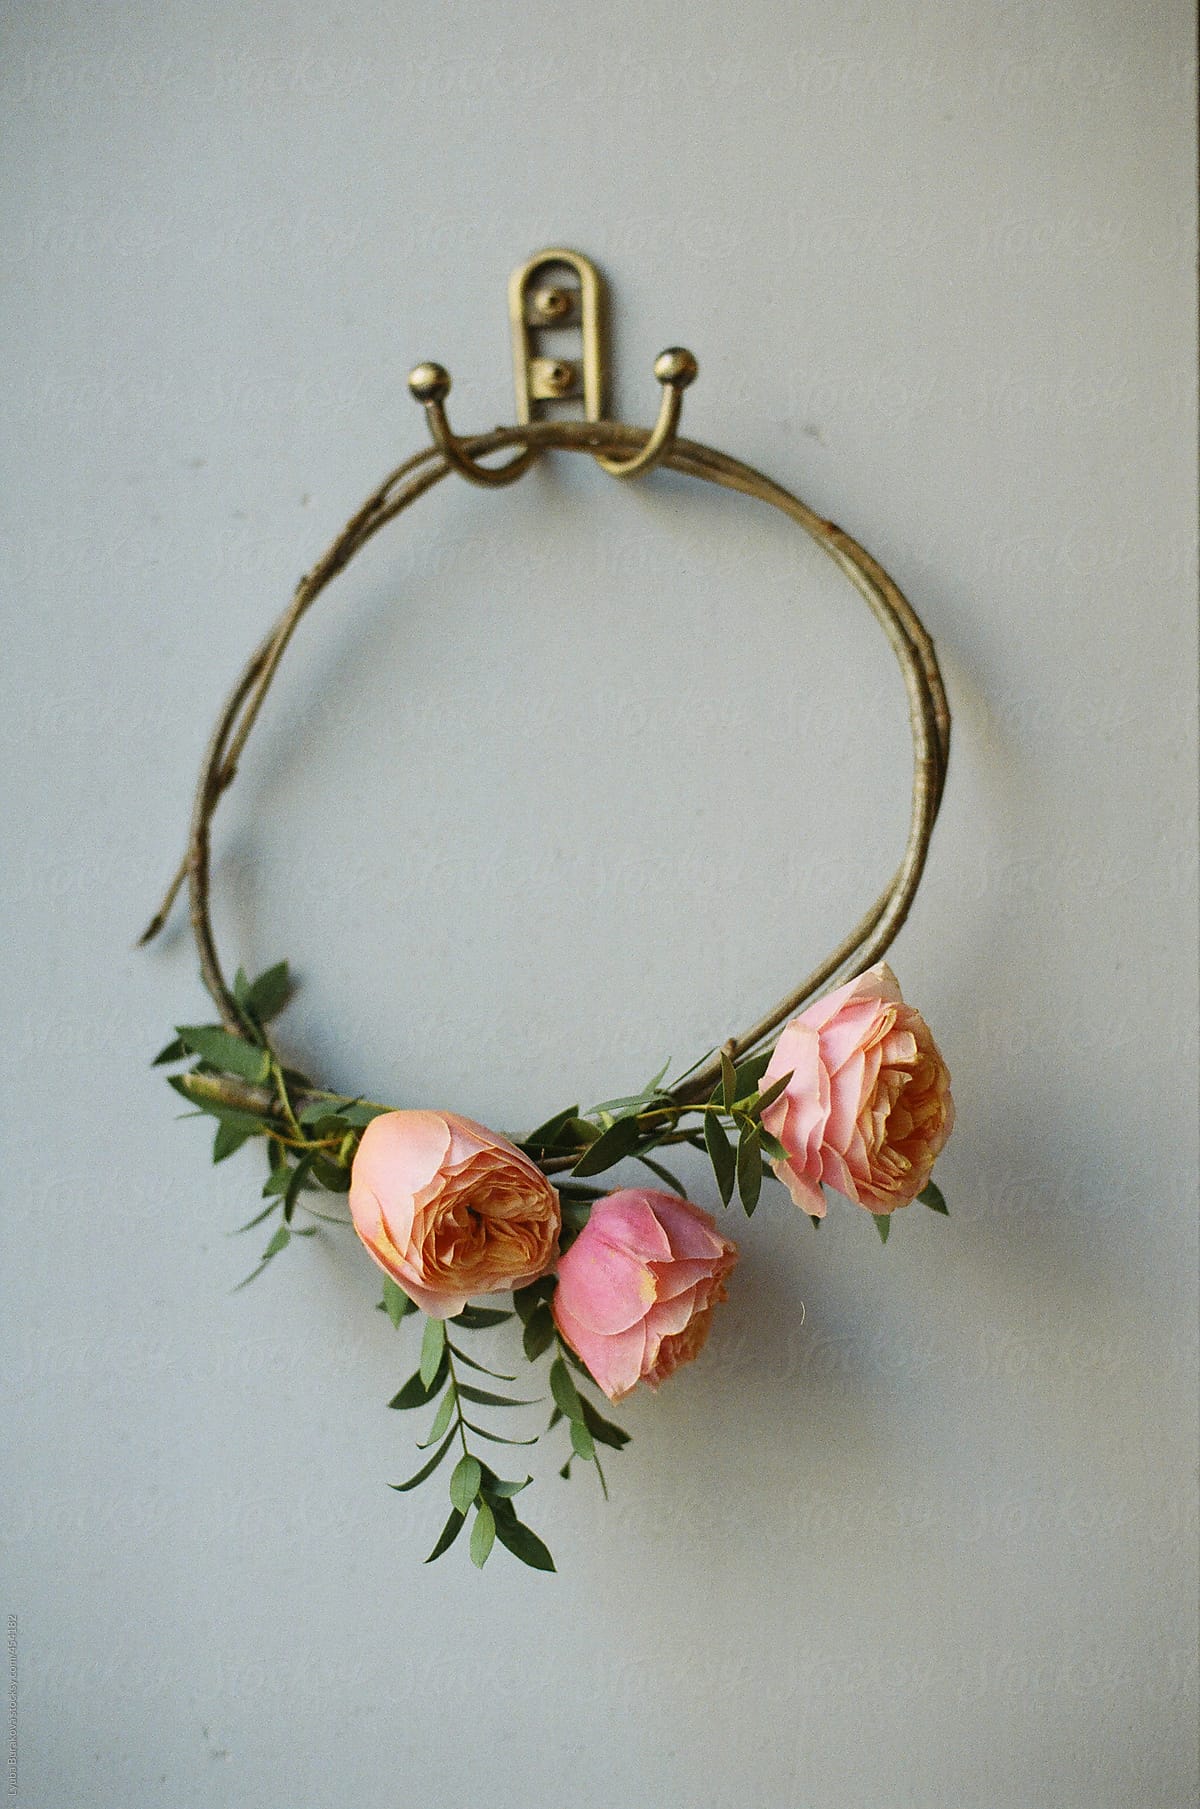 The bride\'s diadem of roses in rustic style  on the wall hook